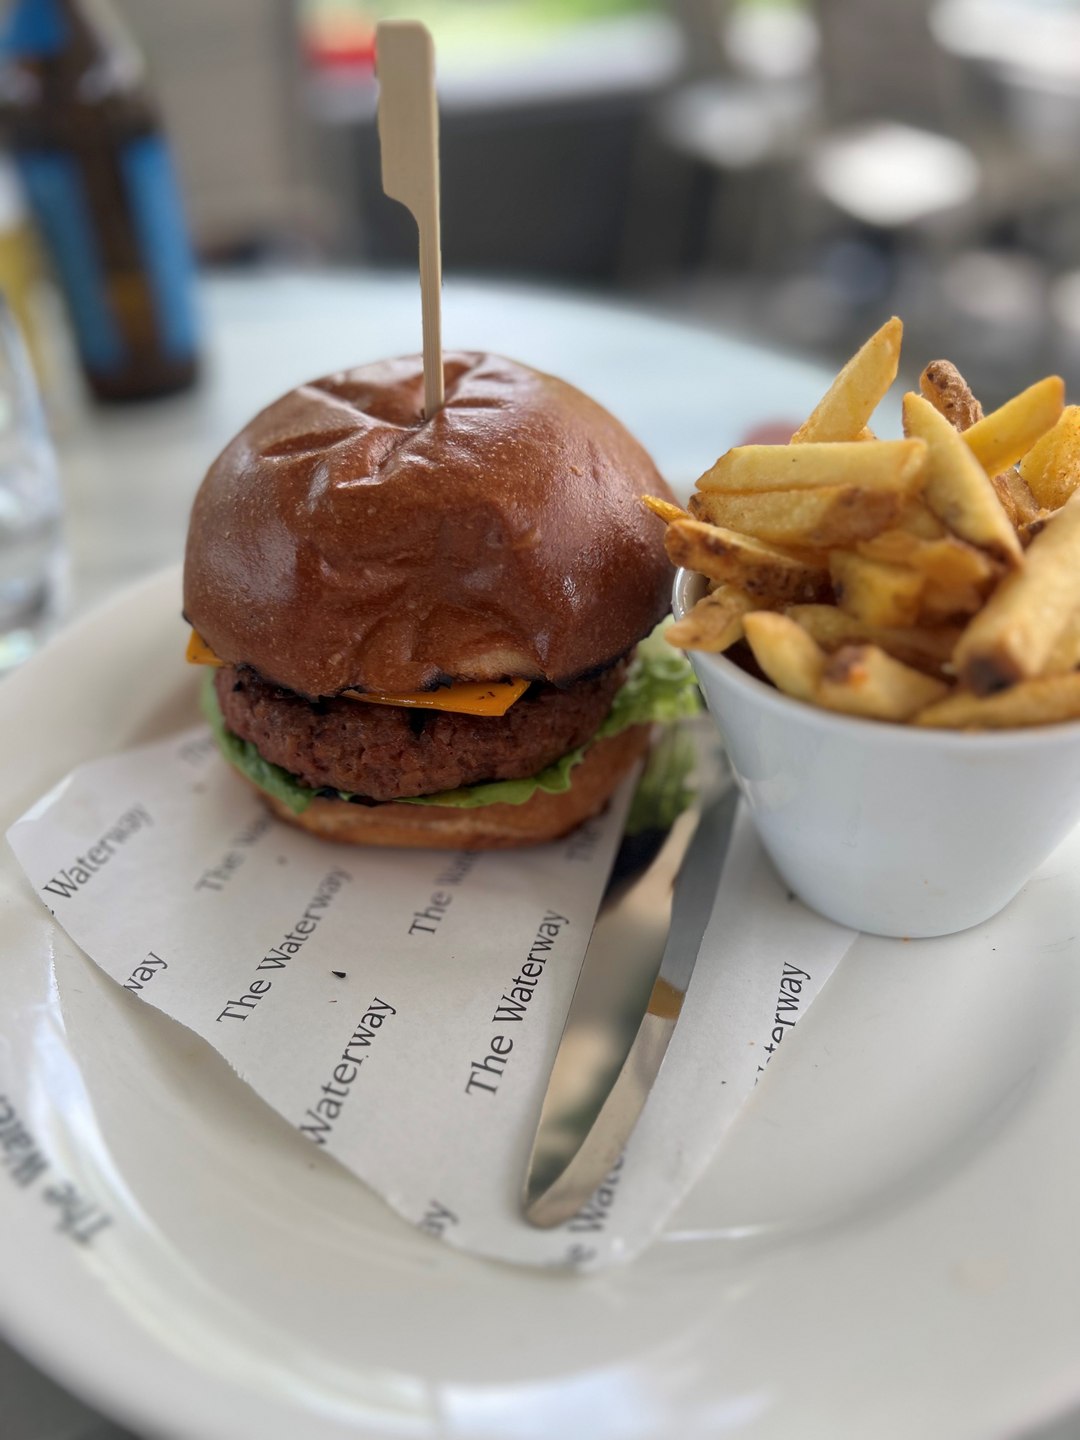 A hamburger placed next to a small bowl of chips